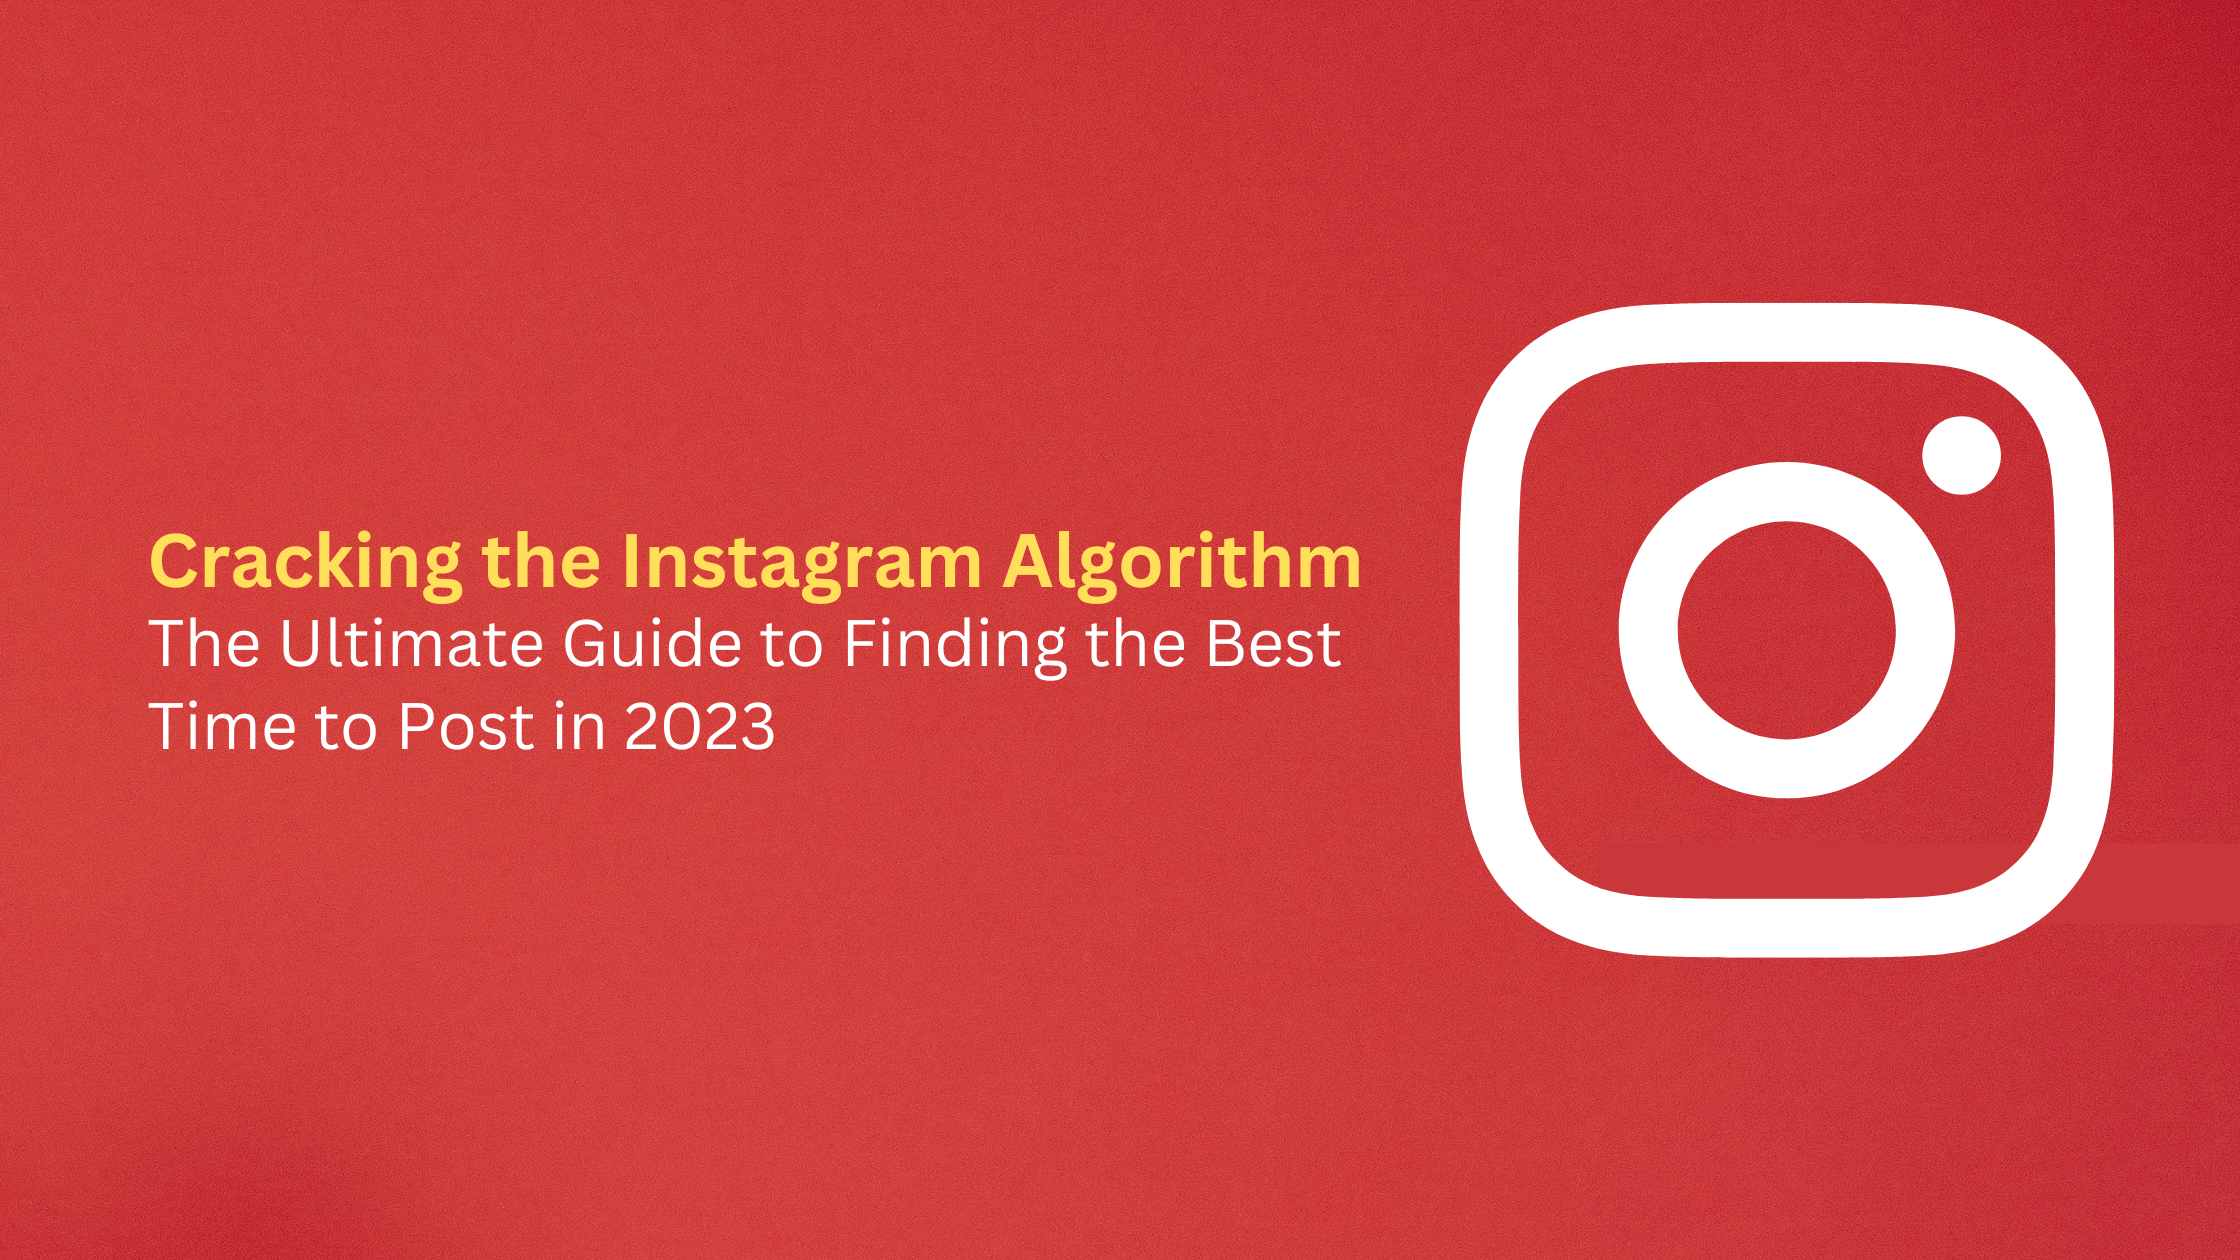 Cracking the Instagram Algorithm: The Ultimate Guide to Finding the Best Time to Post in 2023